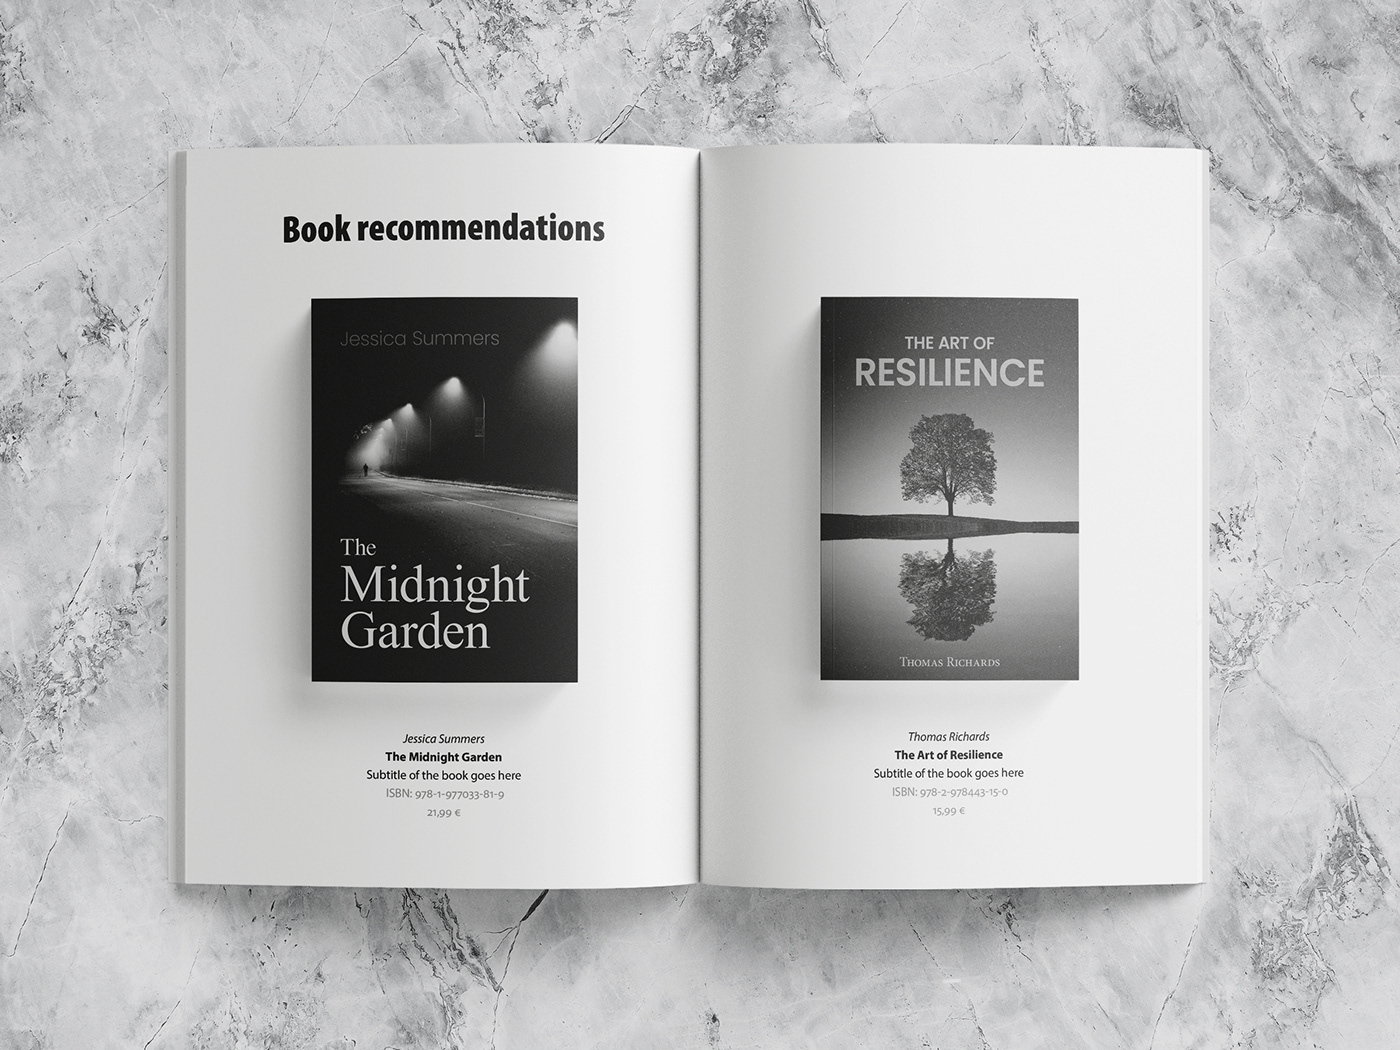 Book mockup – spread with 2 recommended books with their ISBN, number, title, author